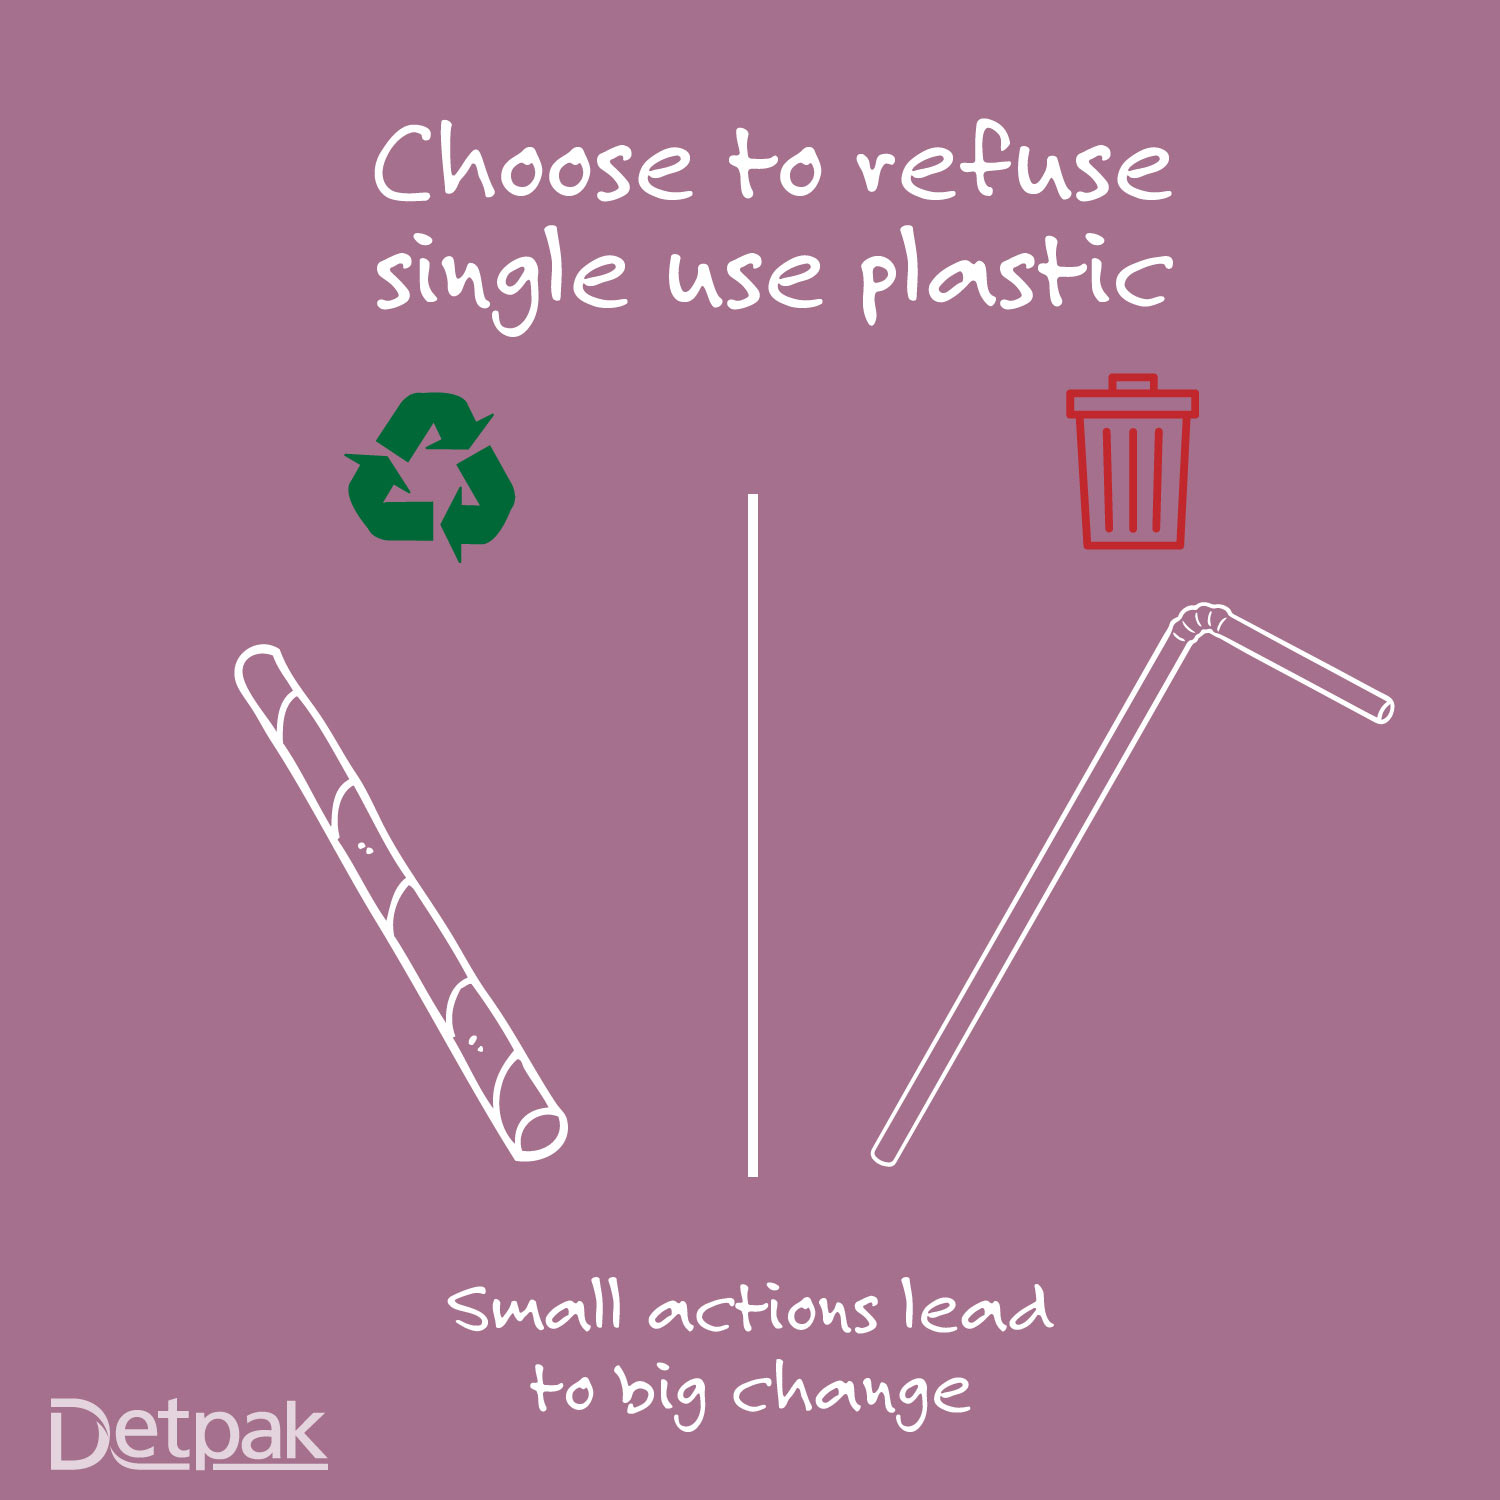 Graphic showing paper recyclable straw versus plastic straw destined for landfill